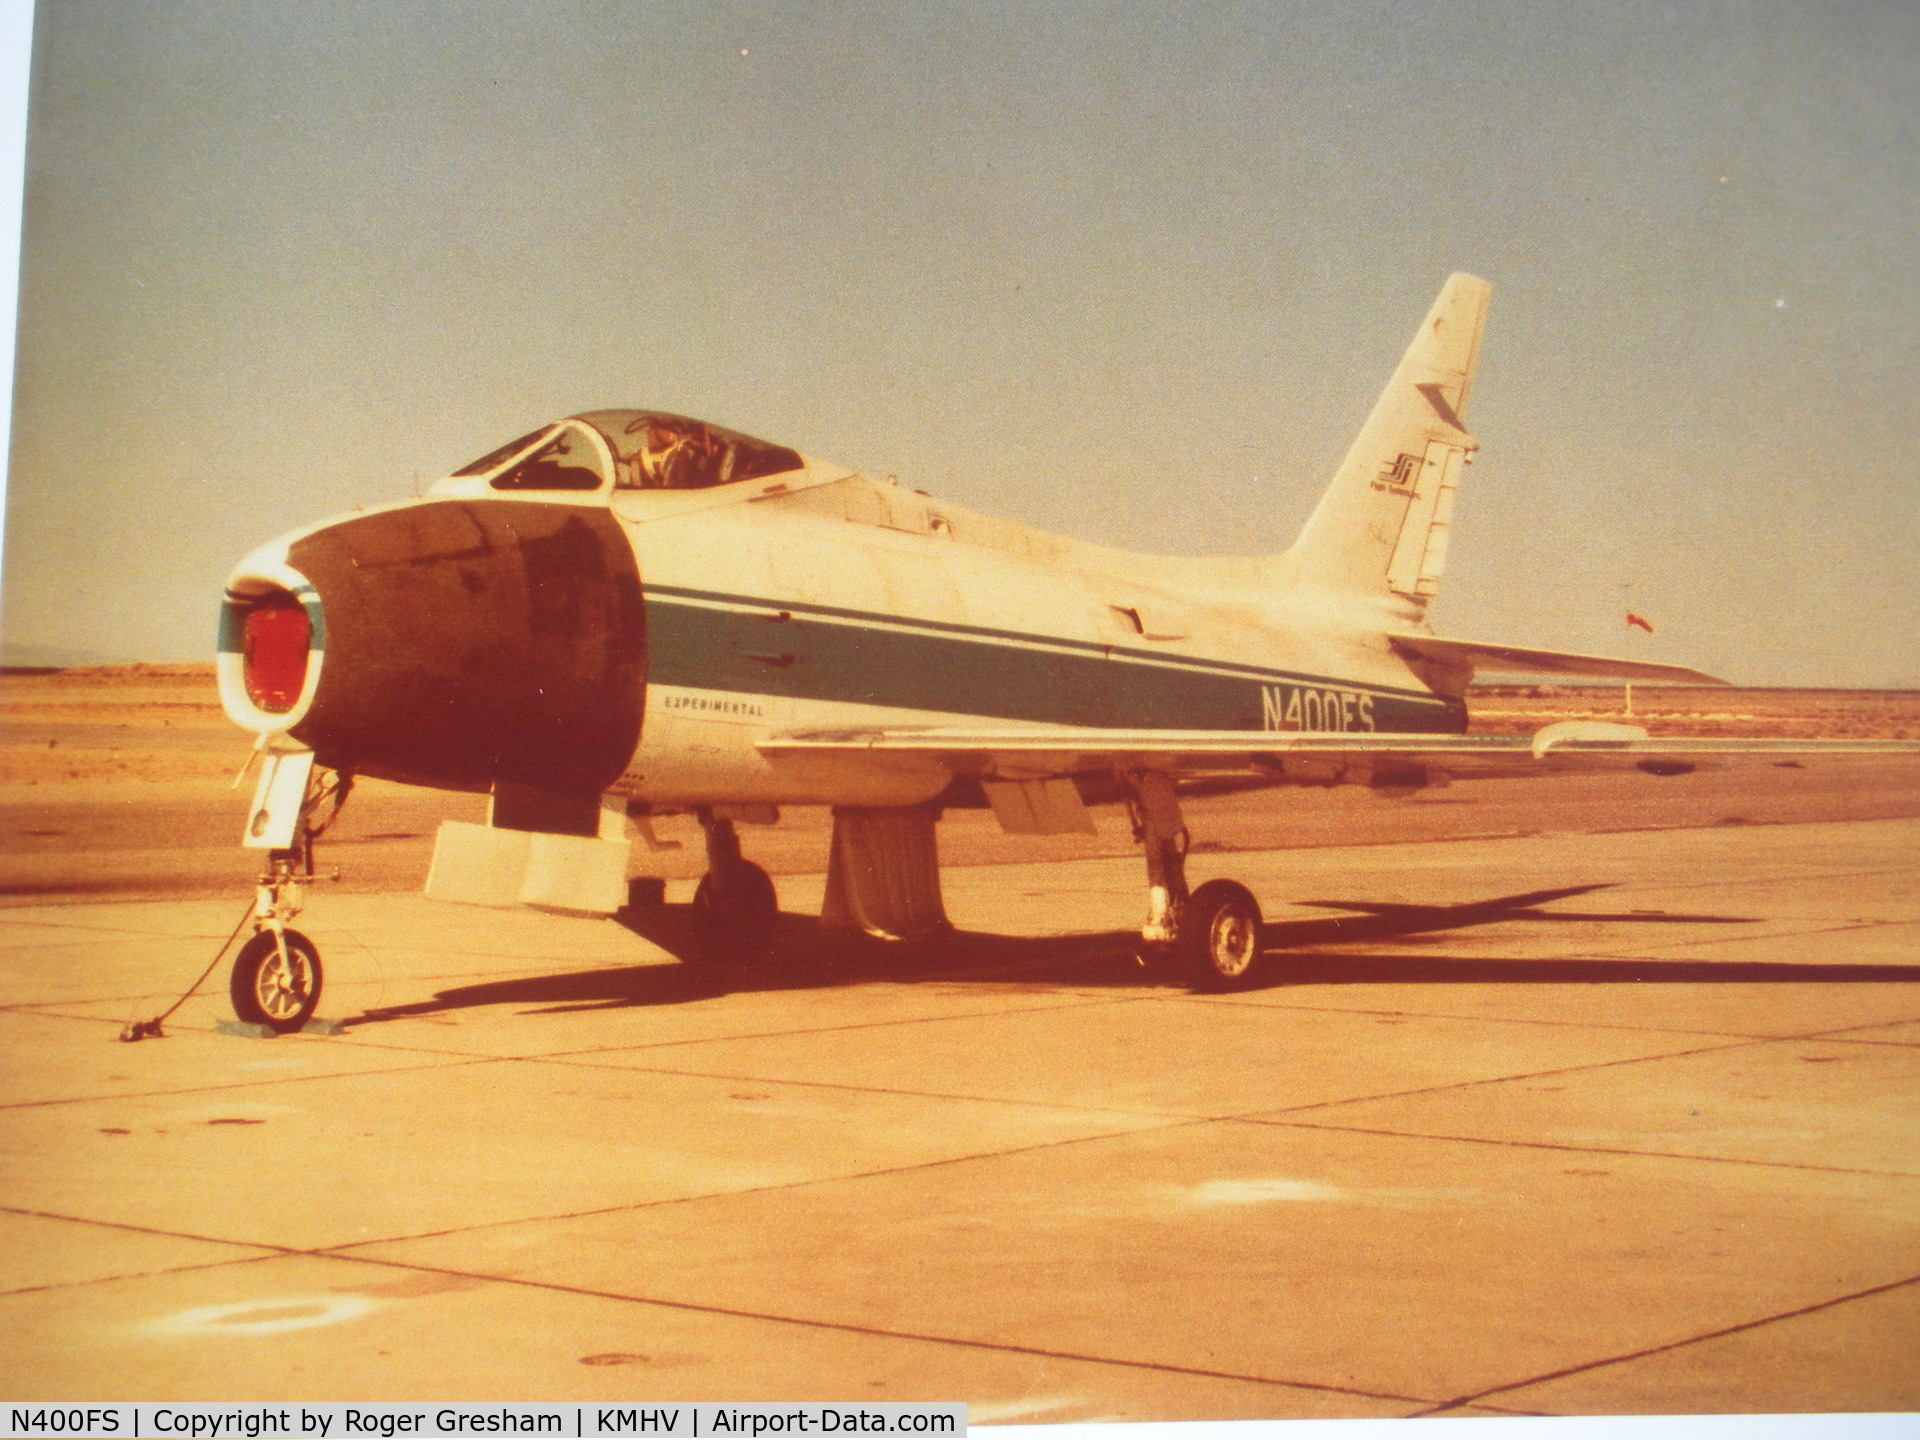 N400FS, 1958 North American AF-1E Fury C/N 244-83, taken at Mohave Airport   in 1978